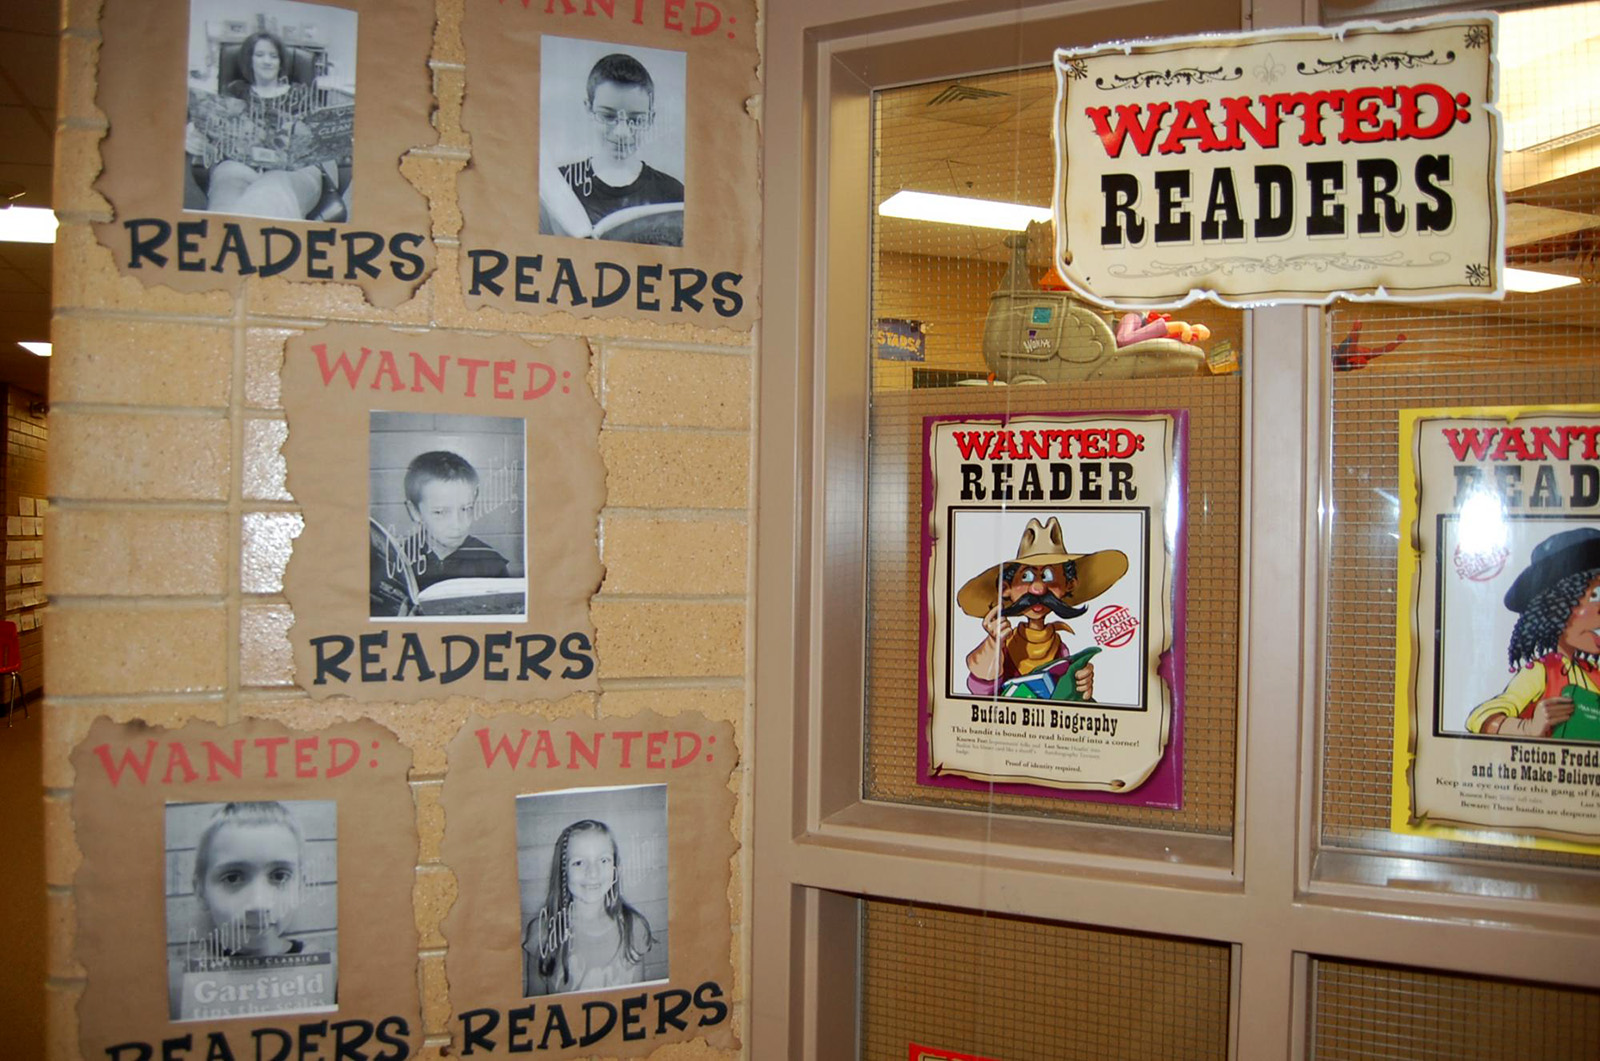 photo of school kids with banner "readers wanted"